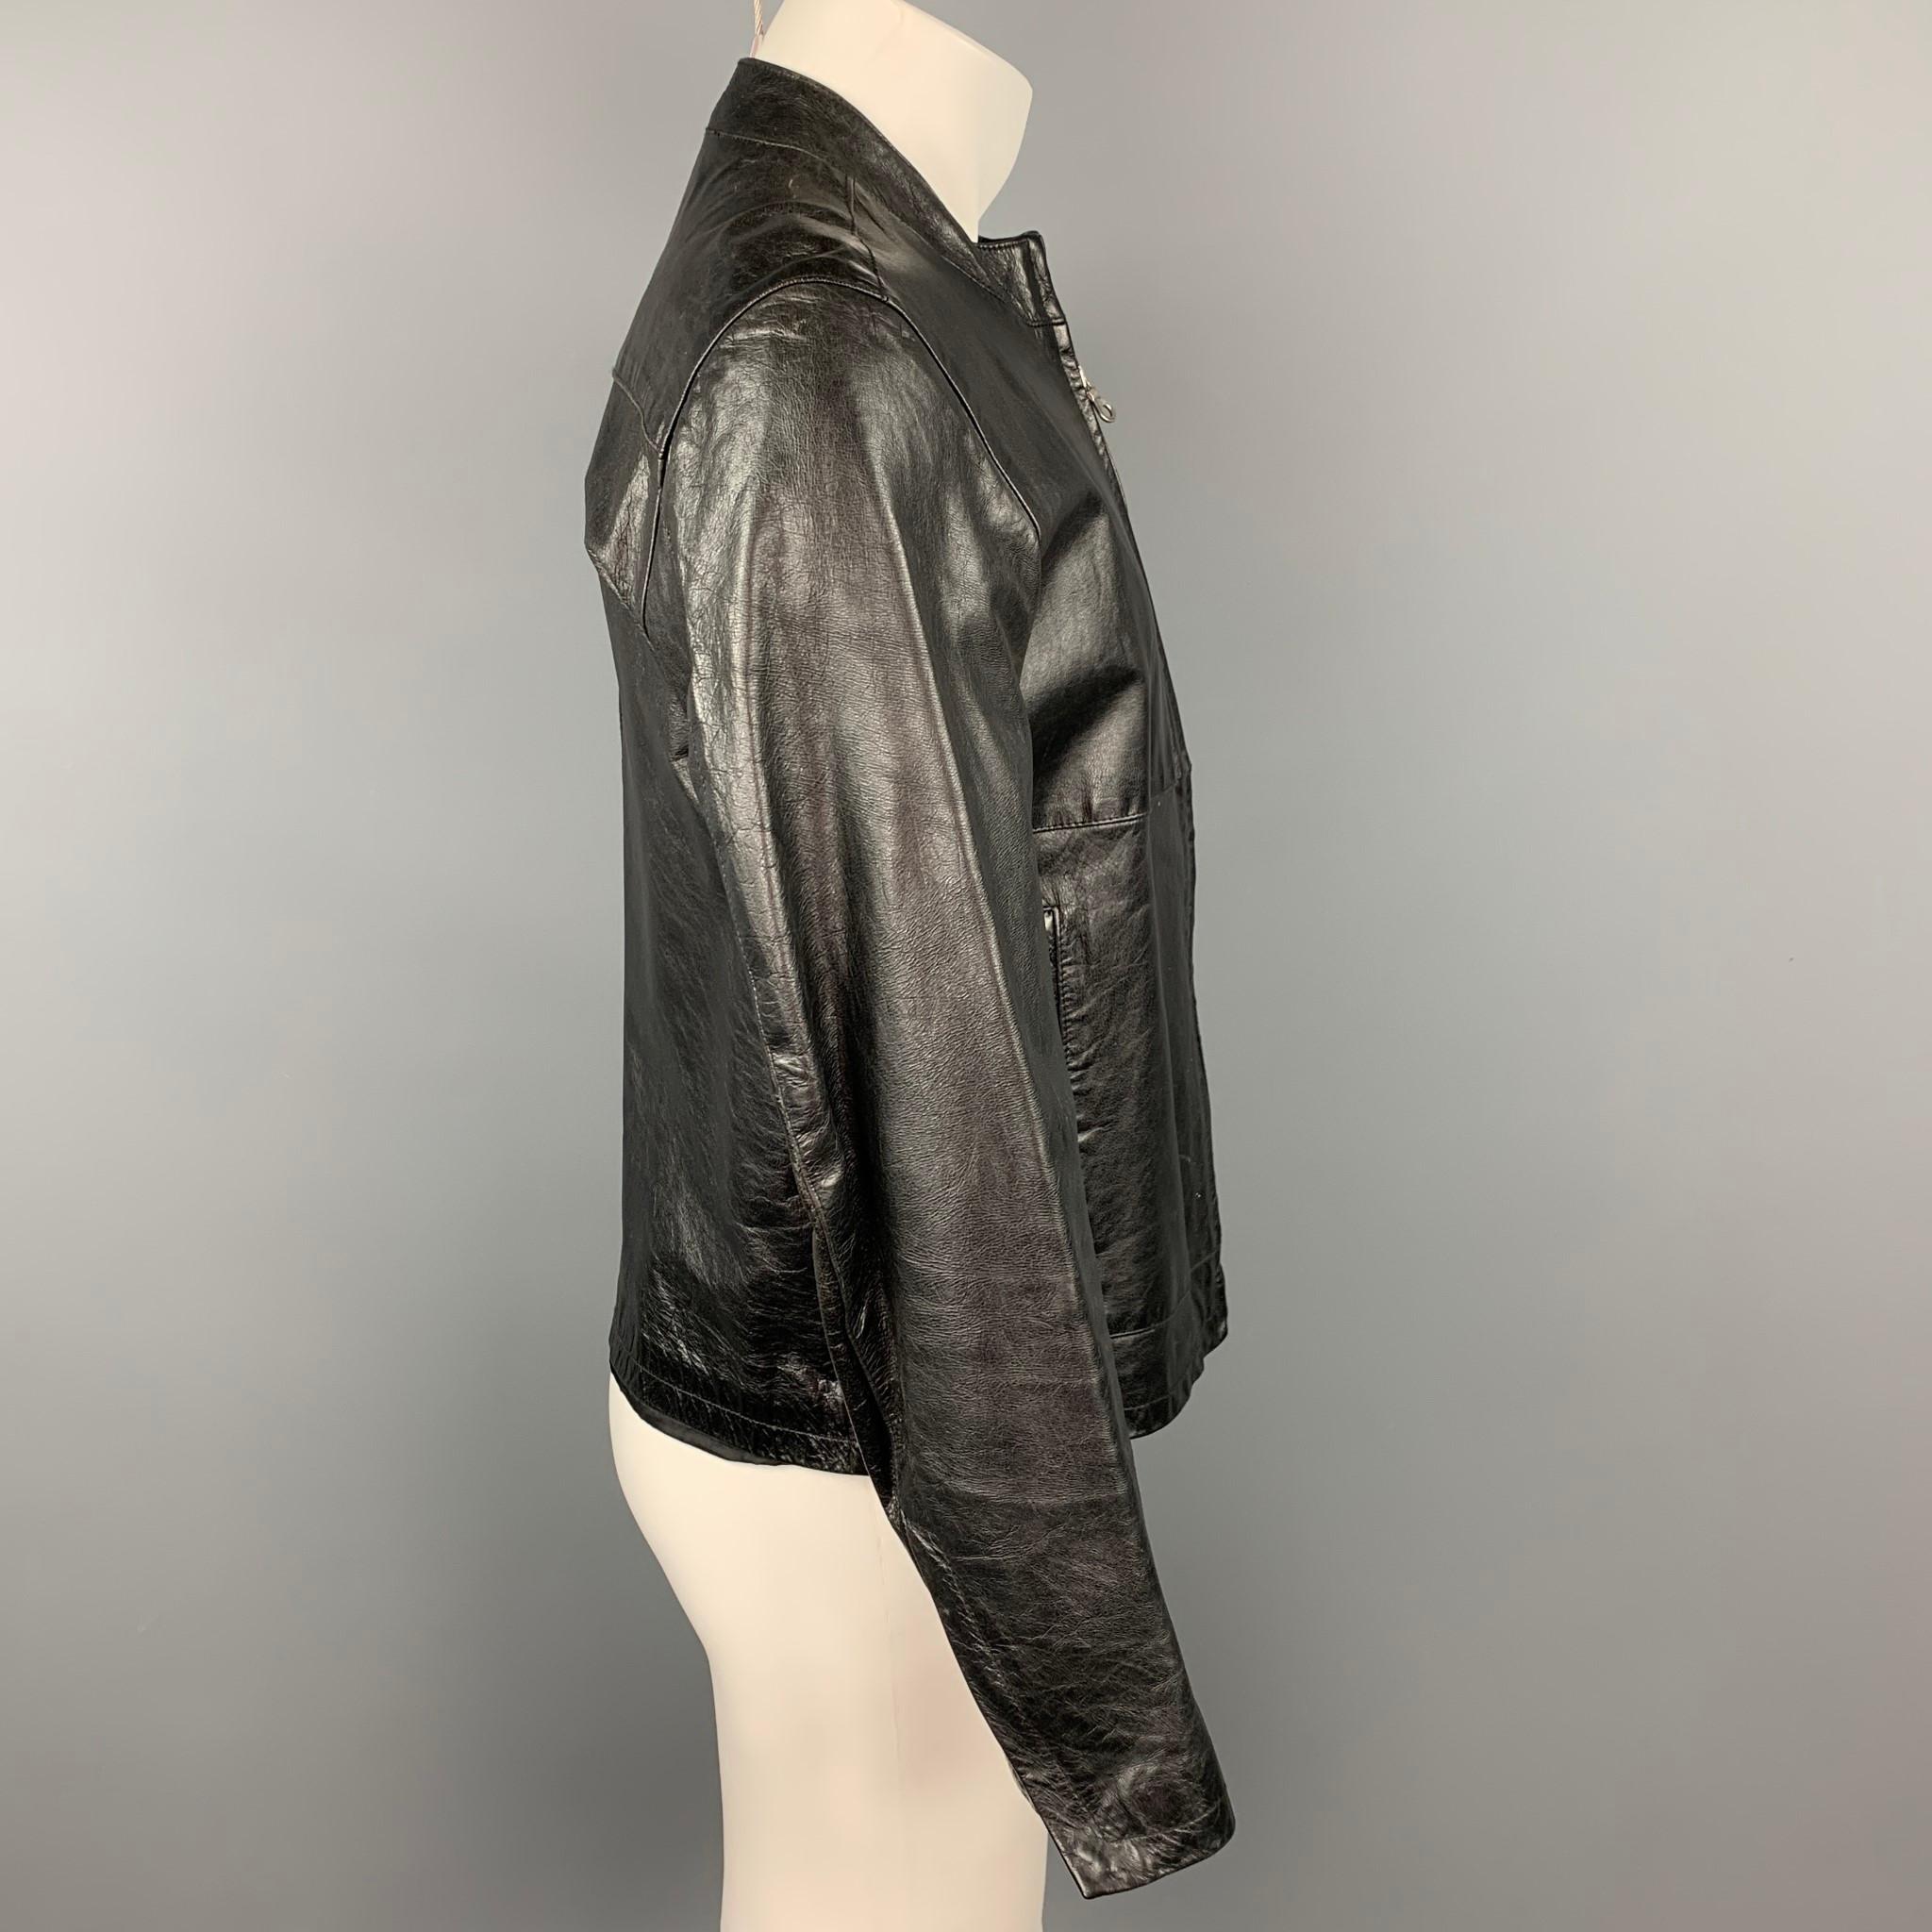 SISLEY jacket comes in a black leather with a full liner featuring top stitching, slit pockets, and a fill zip up closure. Made in Romania. 

Very Good Pre-Owned Condition.
Marked: 48

Measurements:

Shoulder: 18.5 in.
Chest: 41 in.
Sleeve: 24